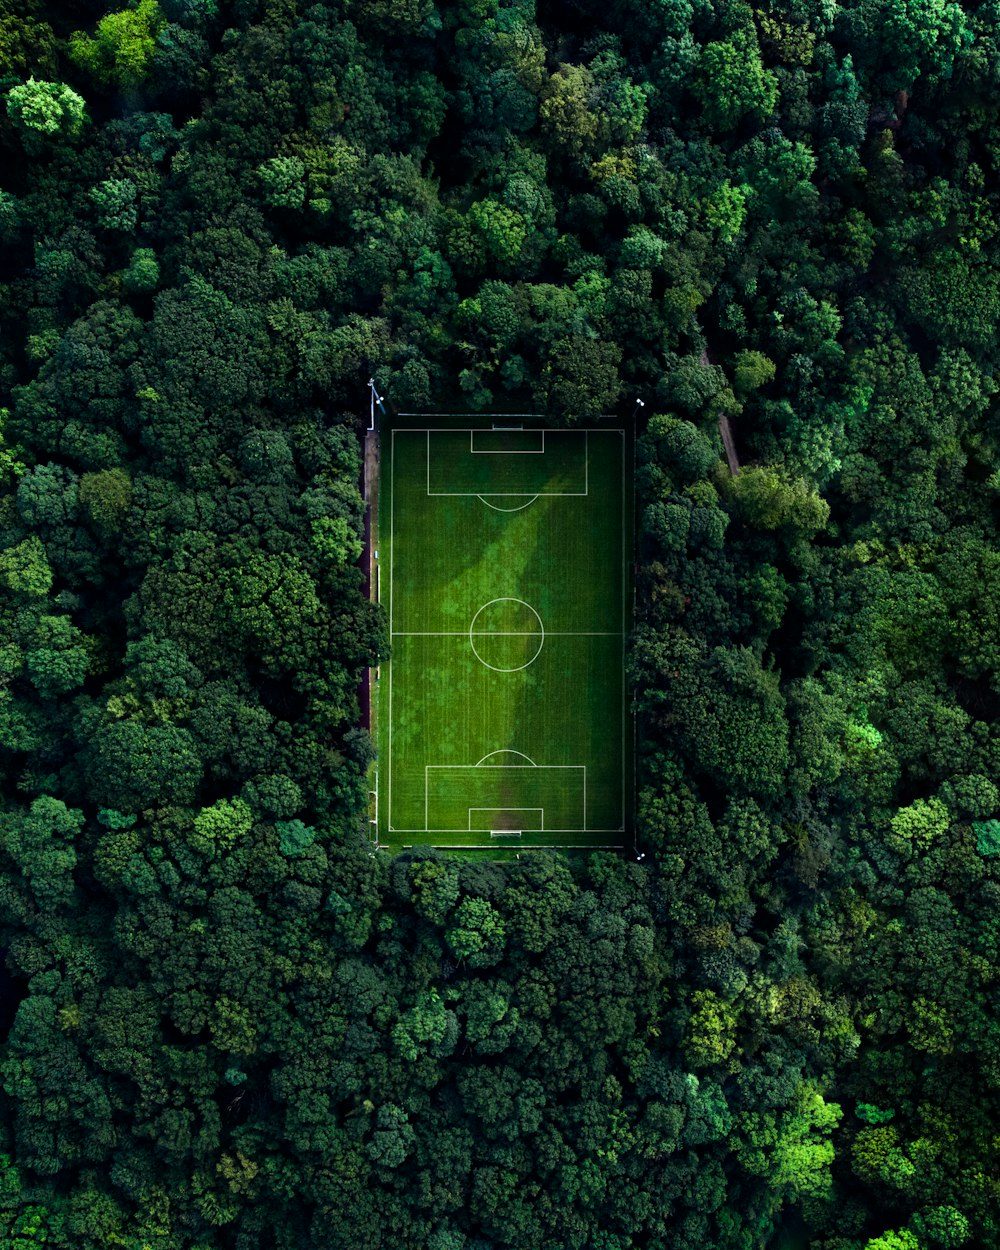 aerial view of green basketball court surrounded by green trees during daytime